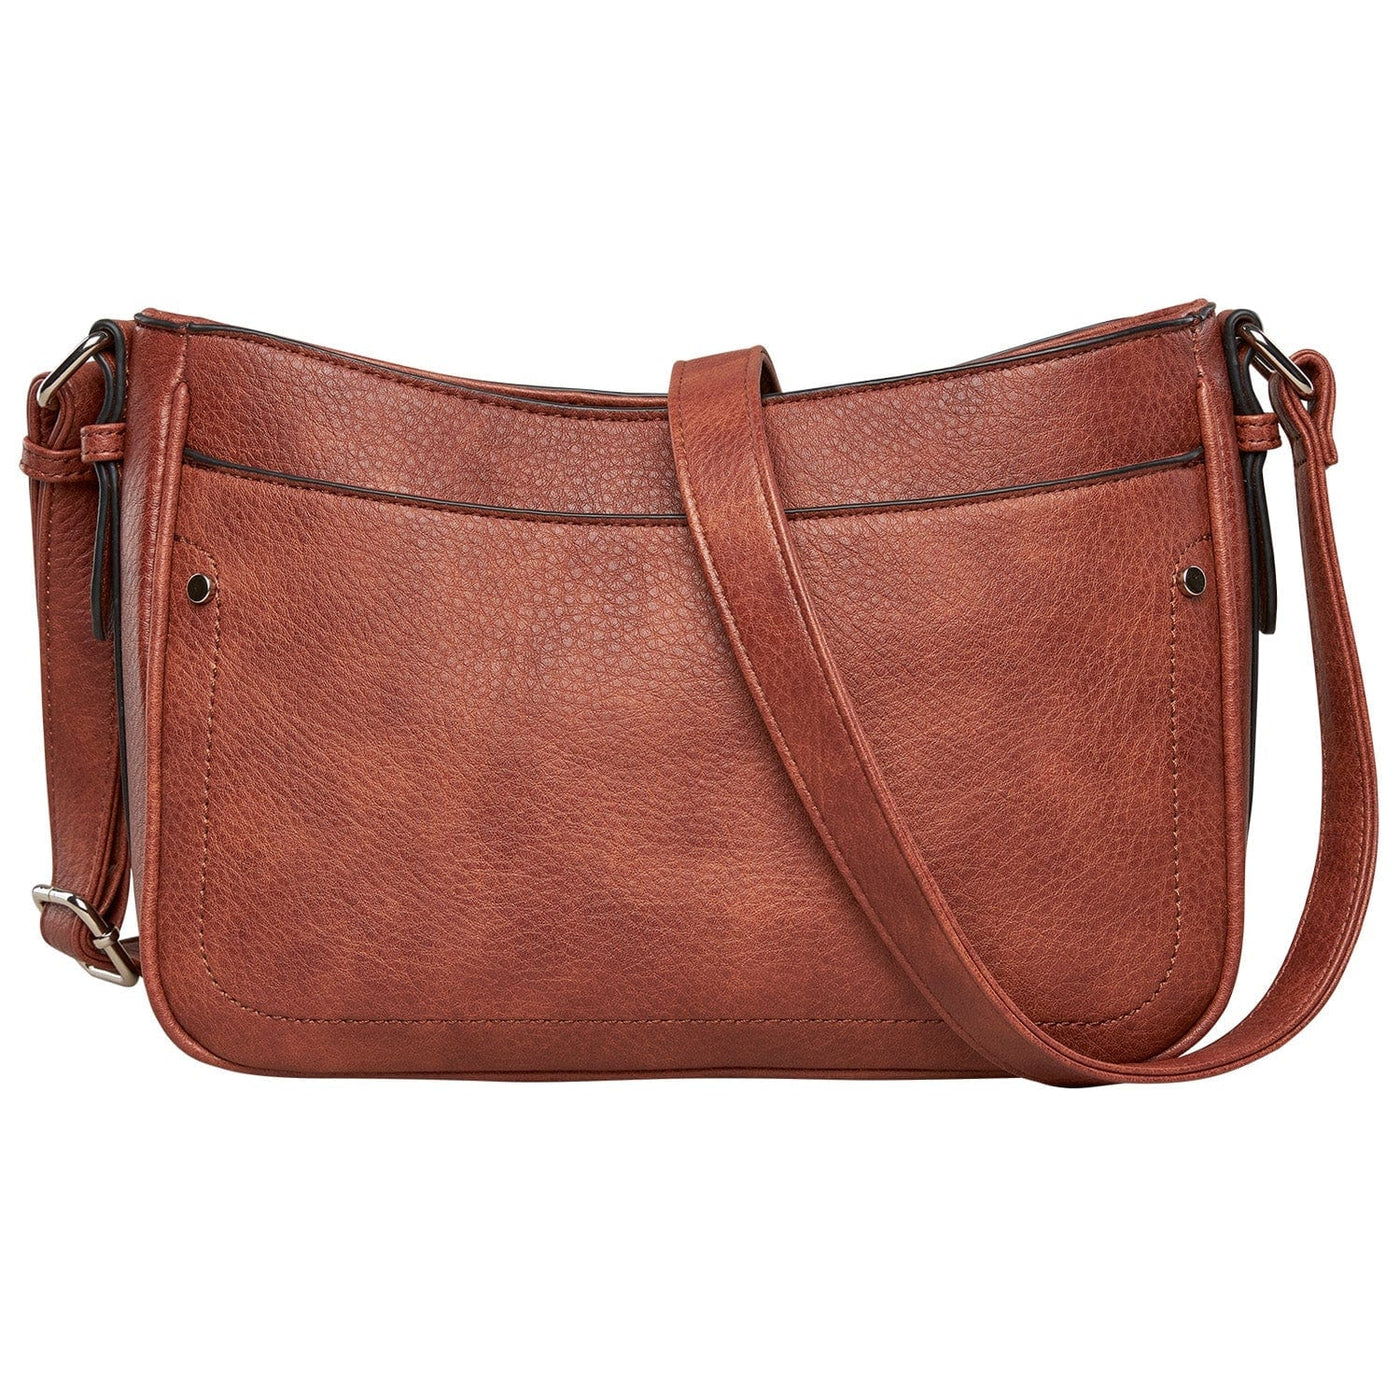 Concealed Carry Emery Crossbody Bag with RFID Slim Wallet